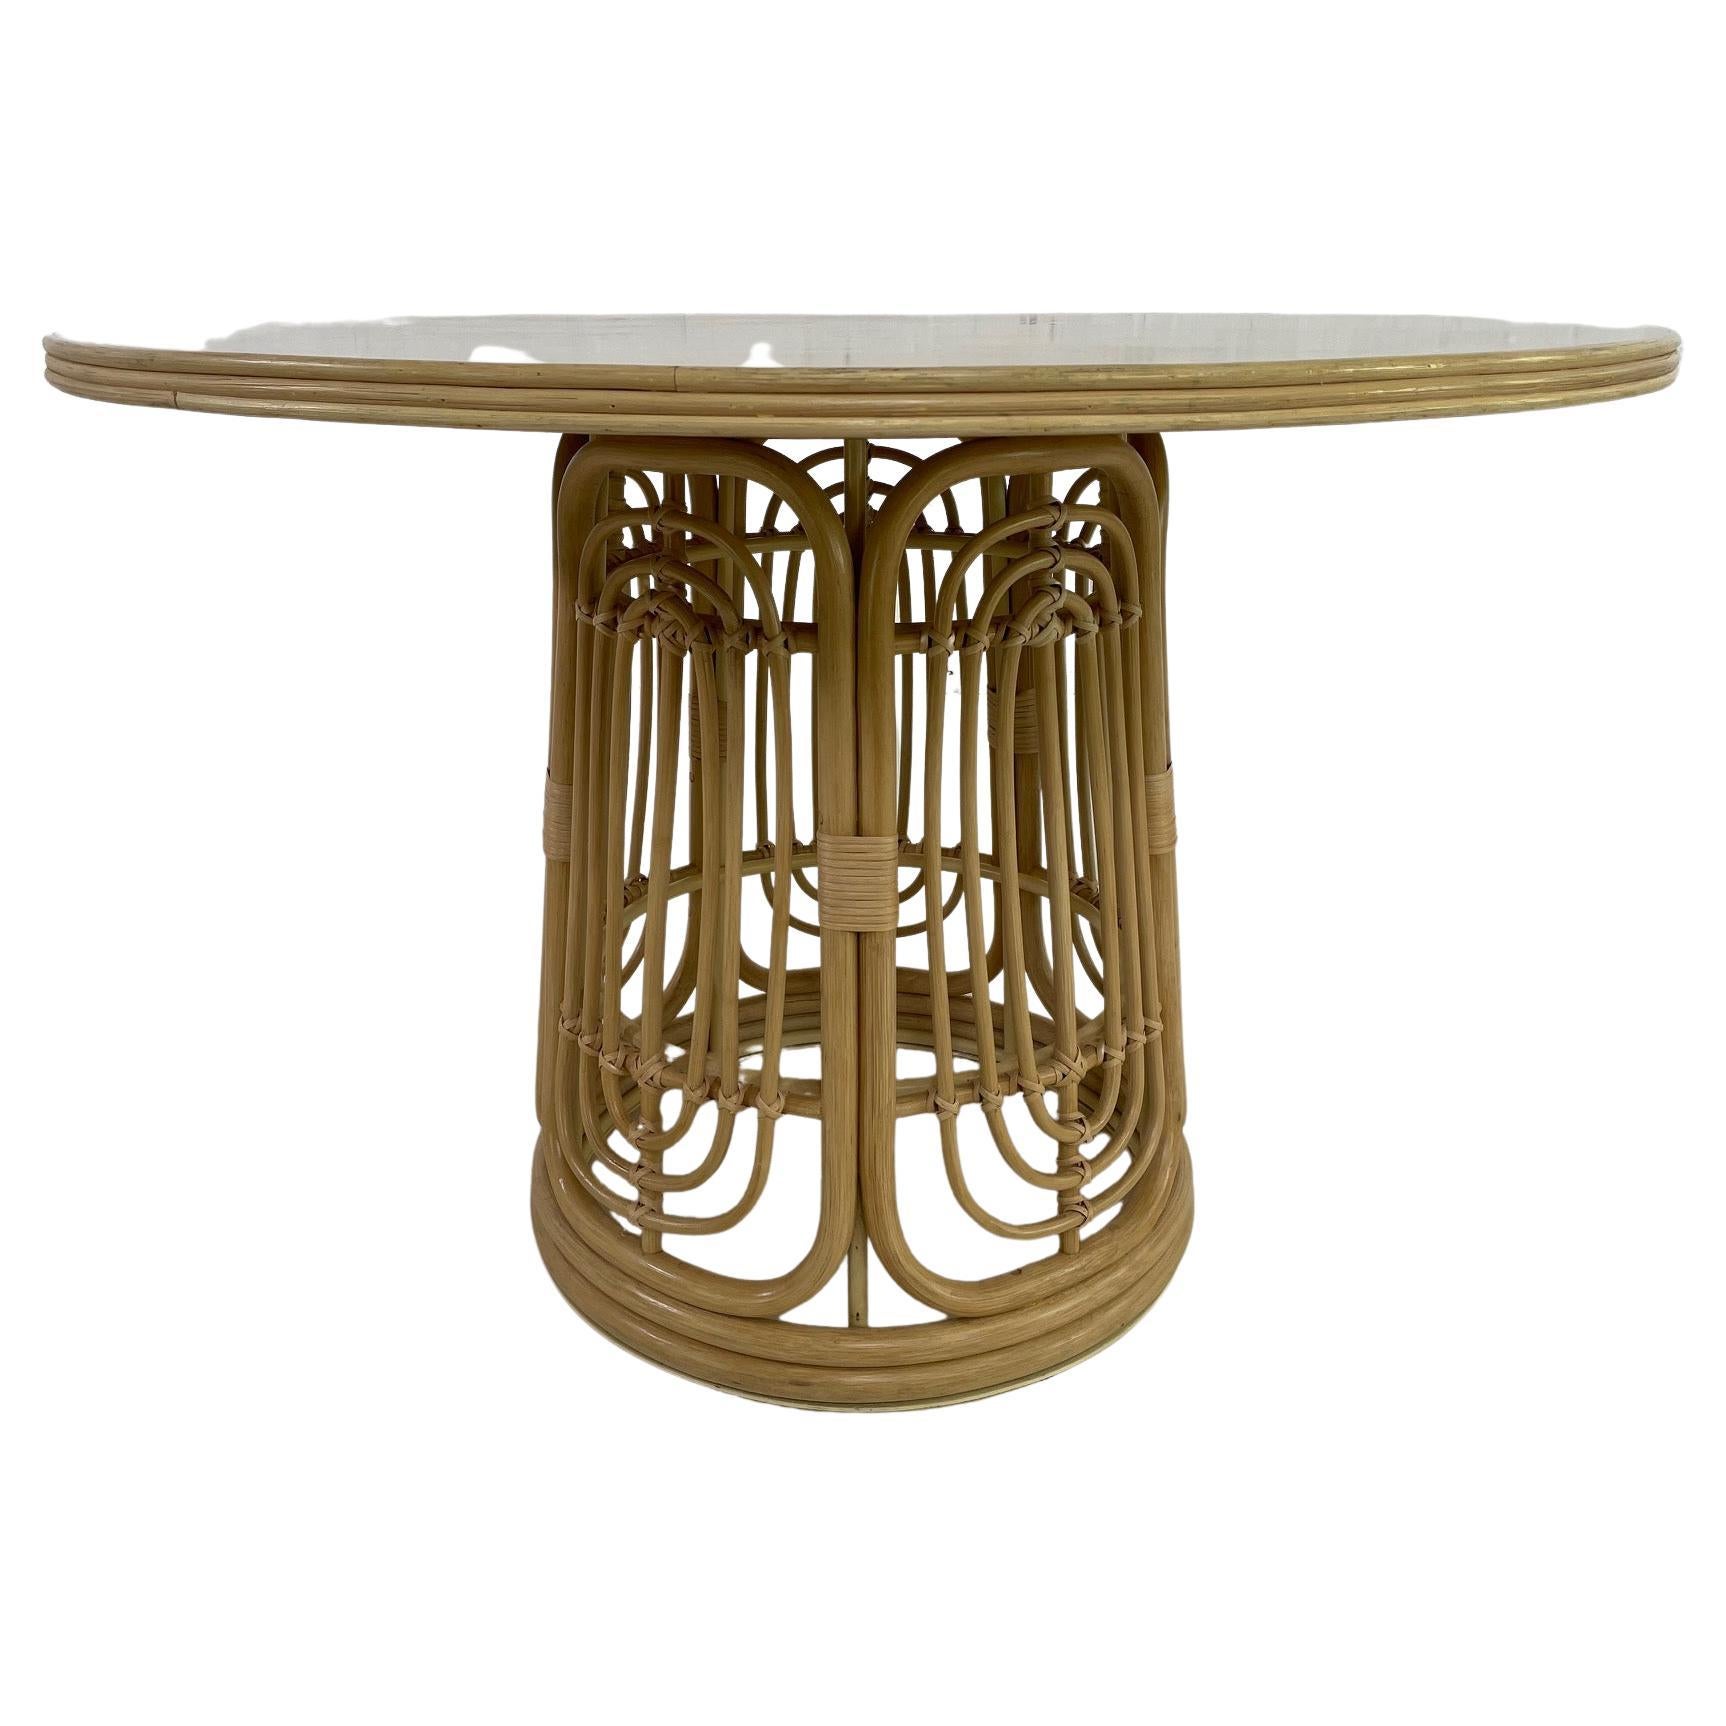 Italian 1970s design style round pedestal table consisting of a metal structure with graphic and aerial rattan base adorned with a round wooden tray.